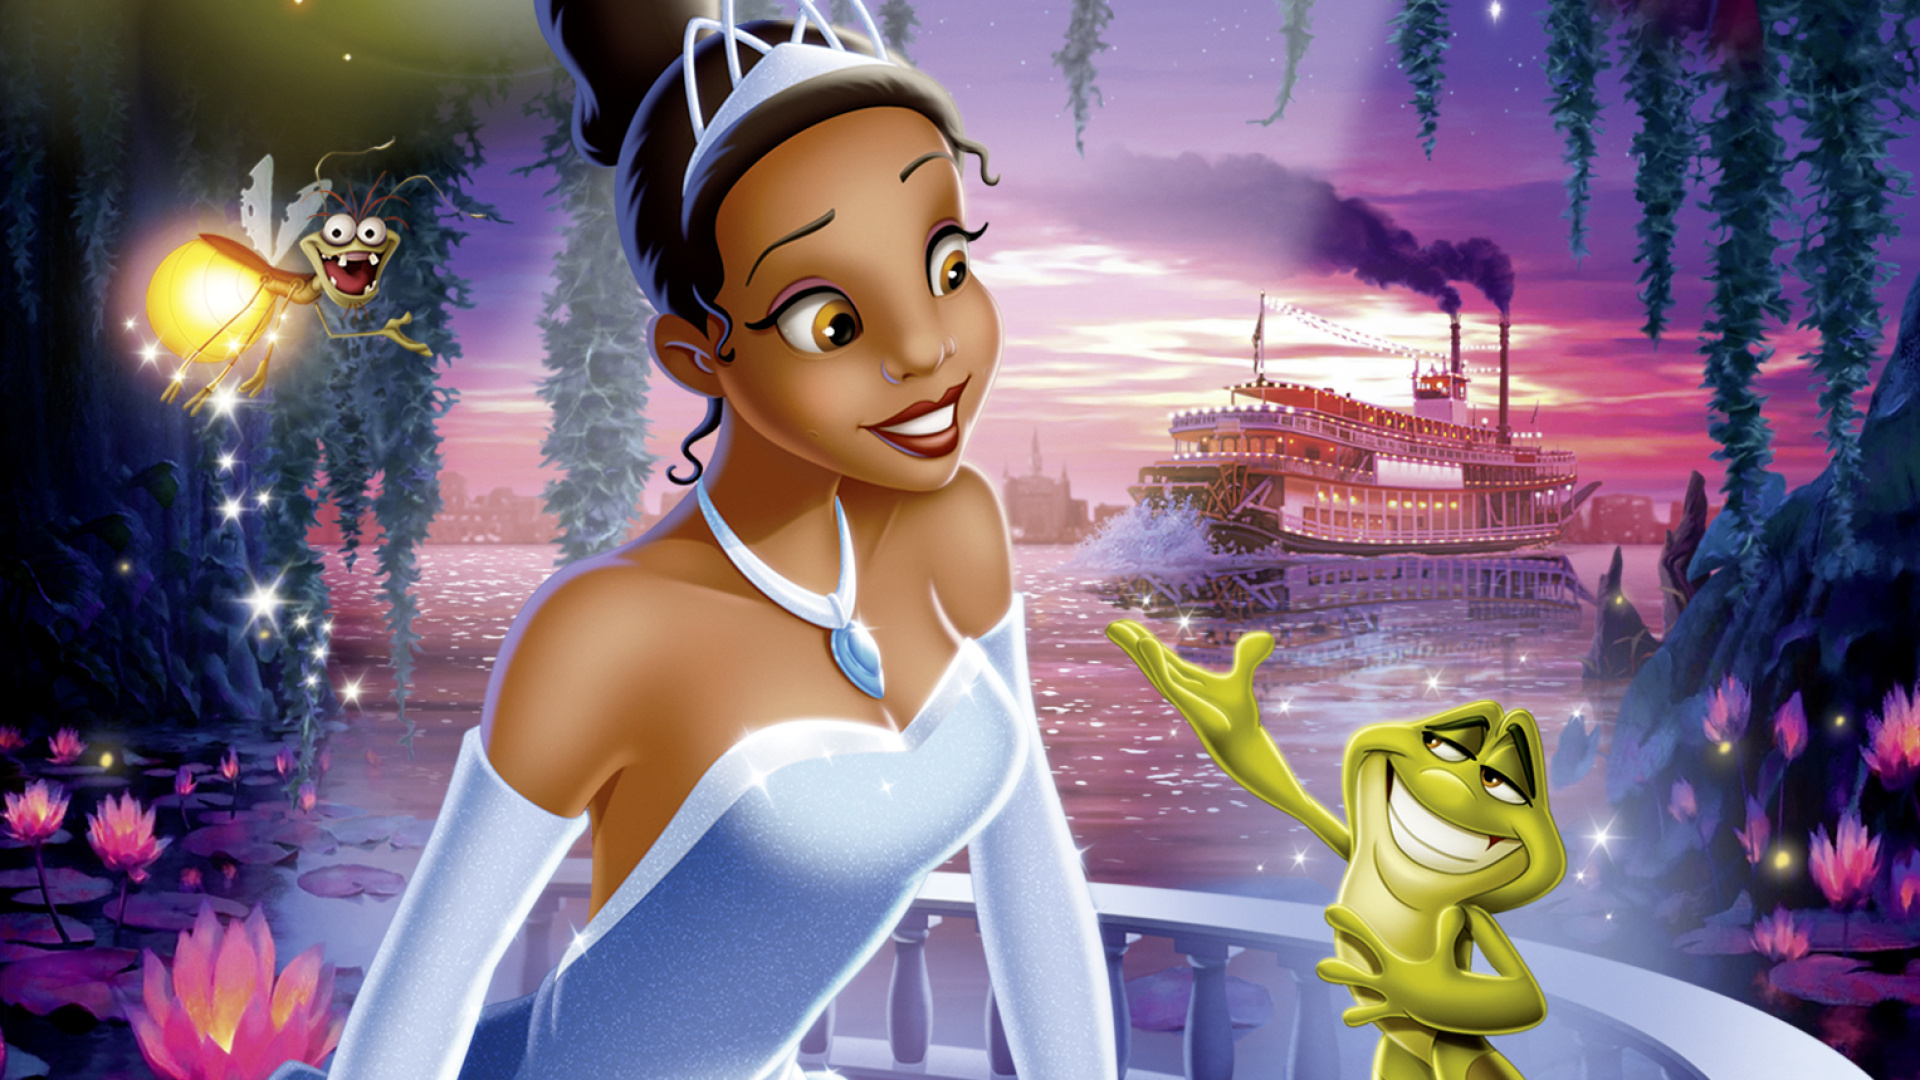 Princess and the Frog, Formation reimagined, Disney animation, Animated wallpapers, 1920x1080 Full HD Desktop